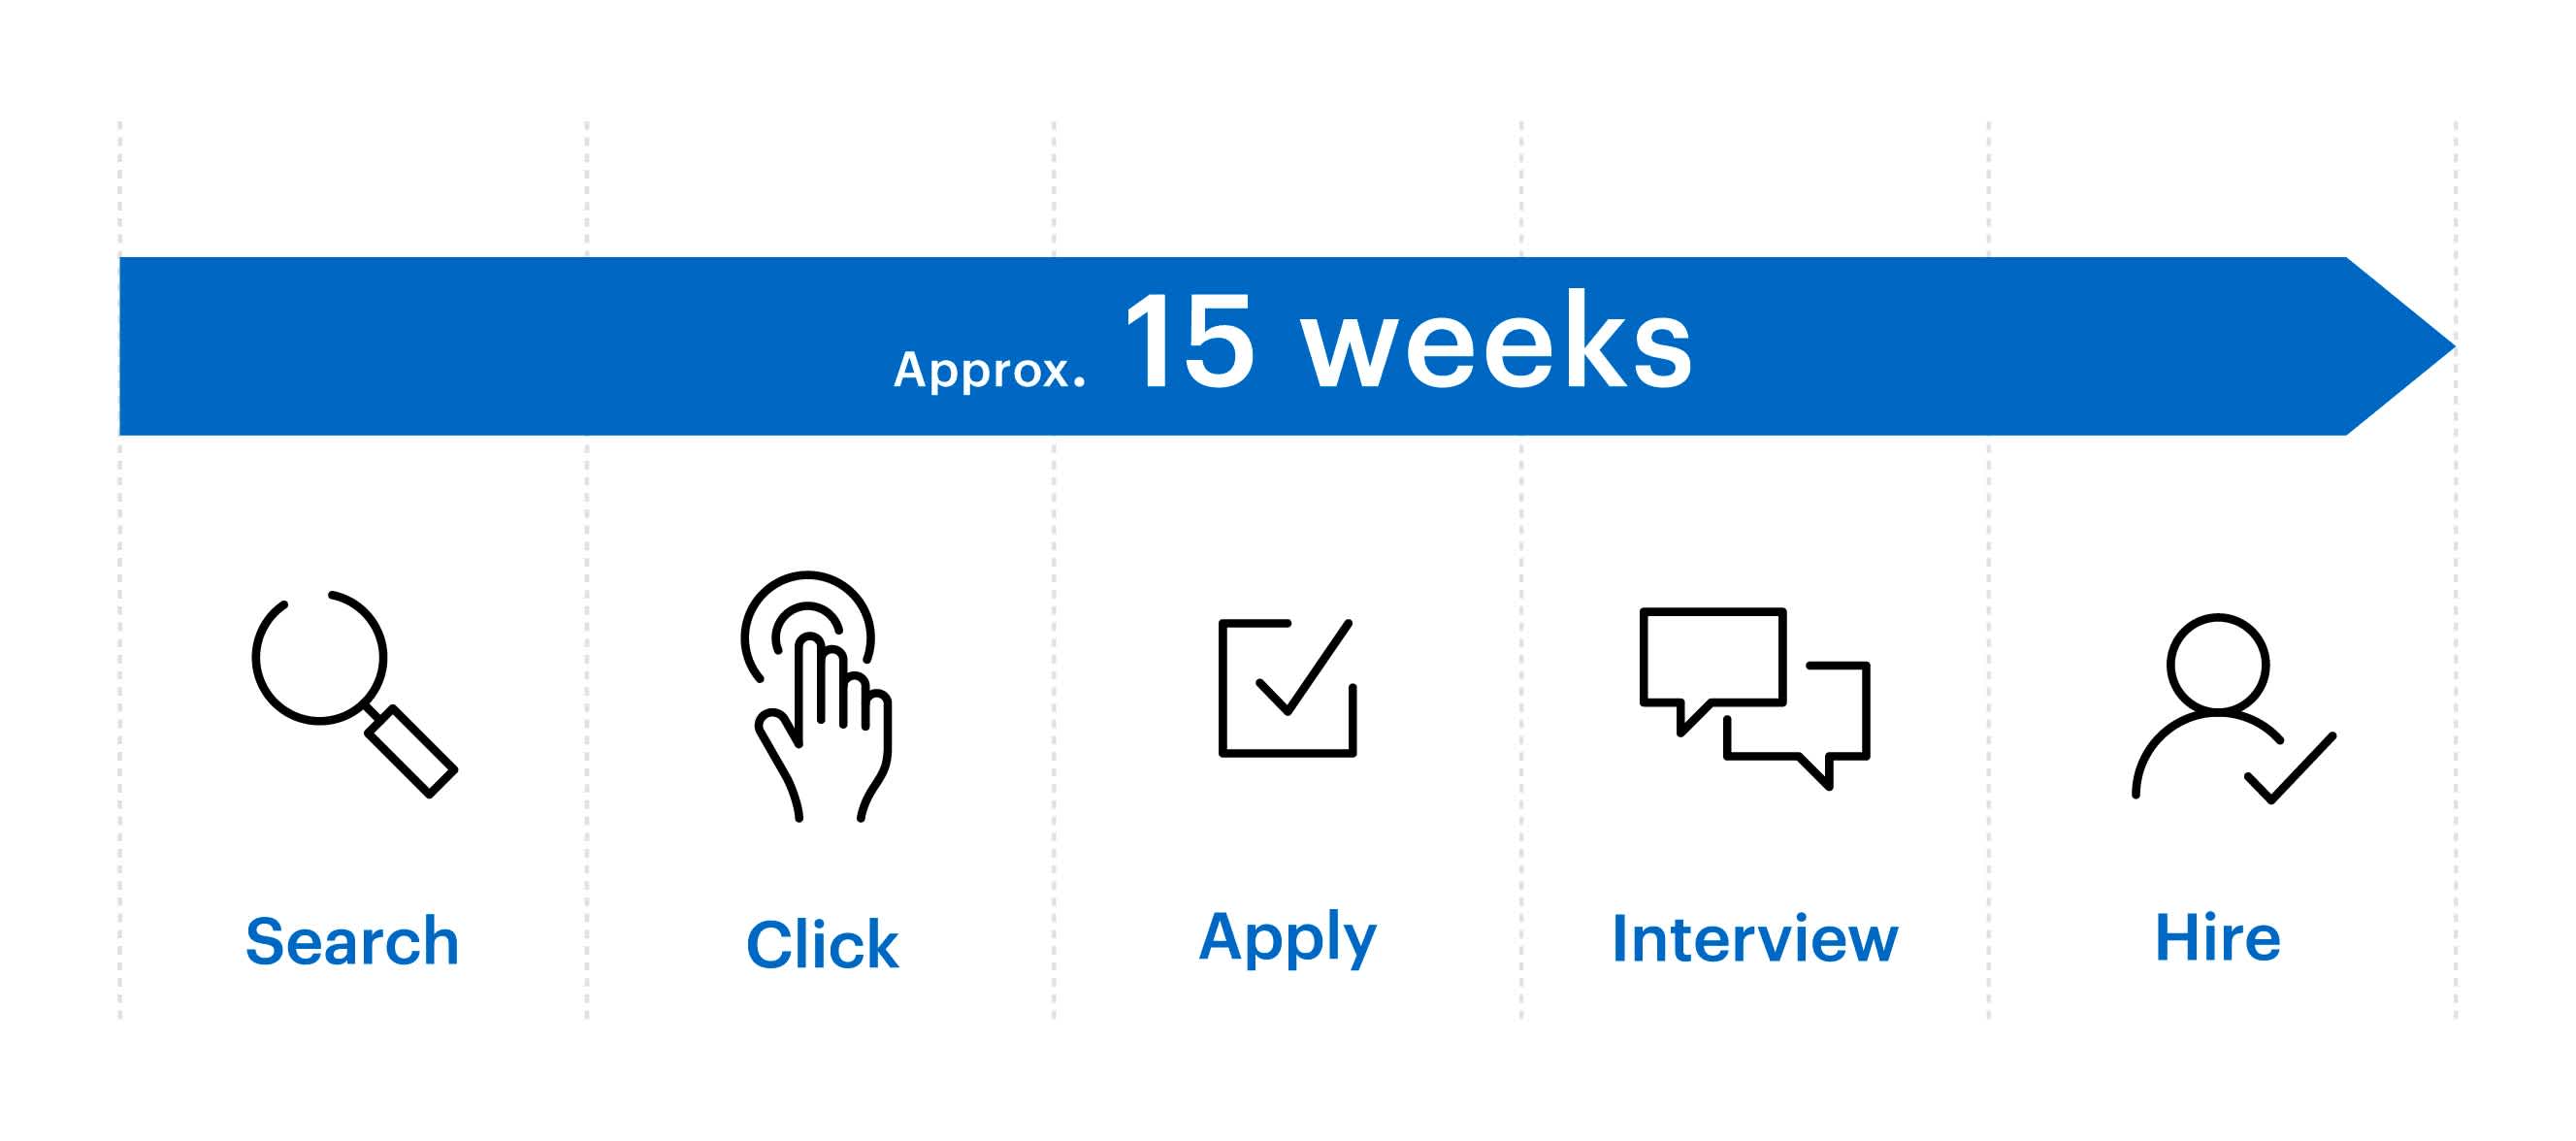 Flow diagram showing the five steps of search, click, apply, interview, and hire for about 15 weeks leading up to employment.